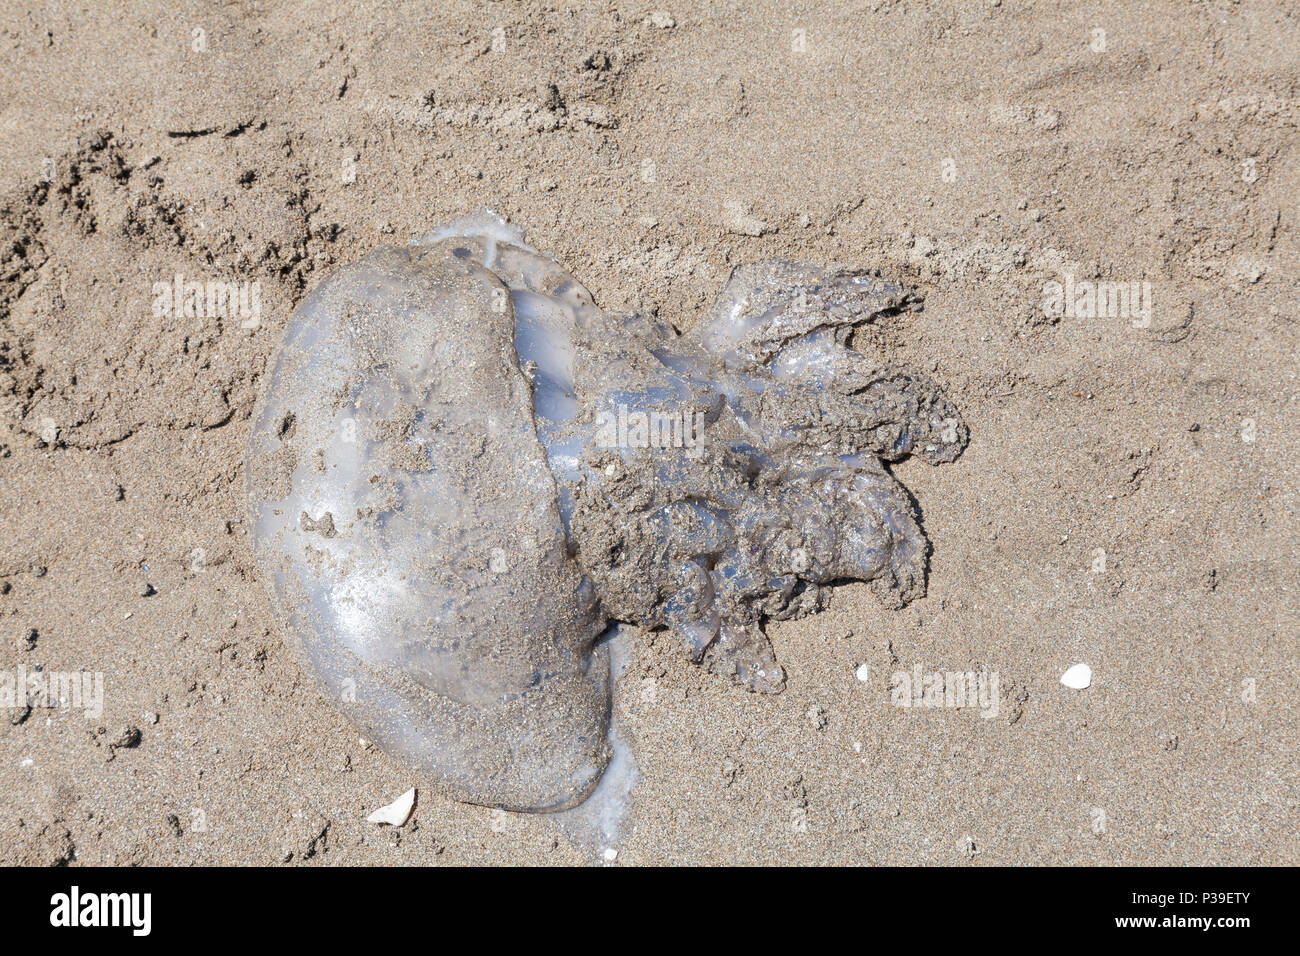 Dead medusoid jellyfish, Medusozoa, cnidaria,  washed ashore on a sandy beach during very hot weather viewed from above in the Adriatic Stock Photo